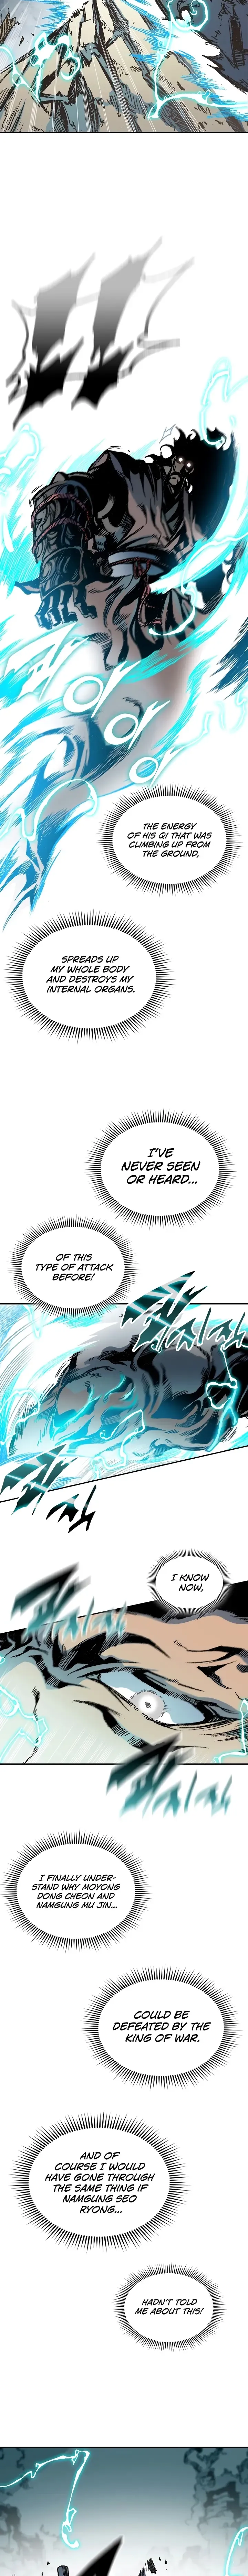 Memoir Of The King Of War Chapter 122 page 7 - MangaWeebs.in